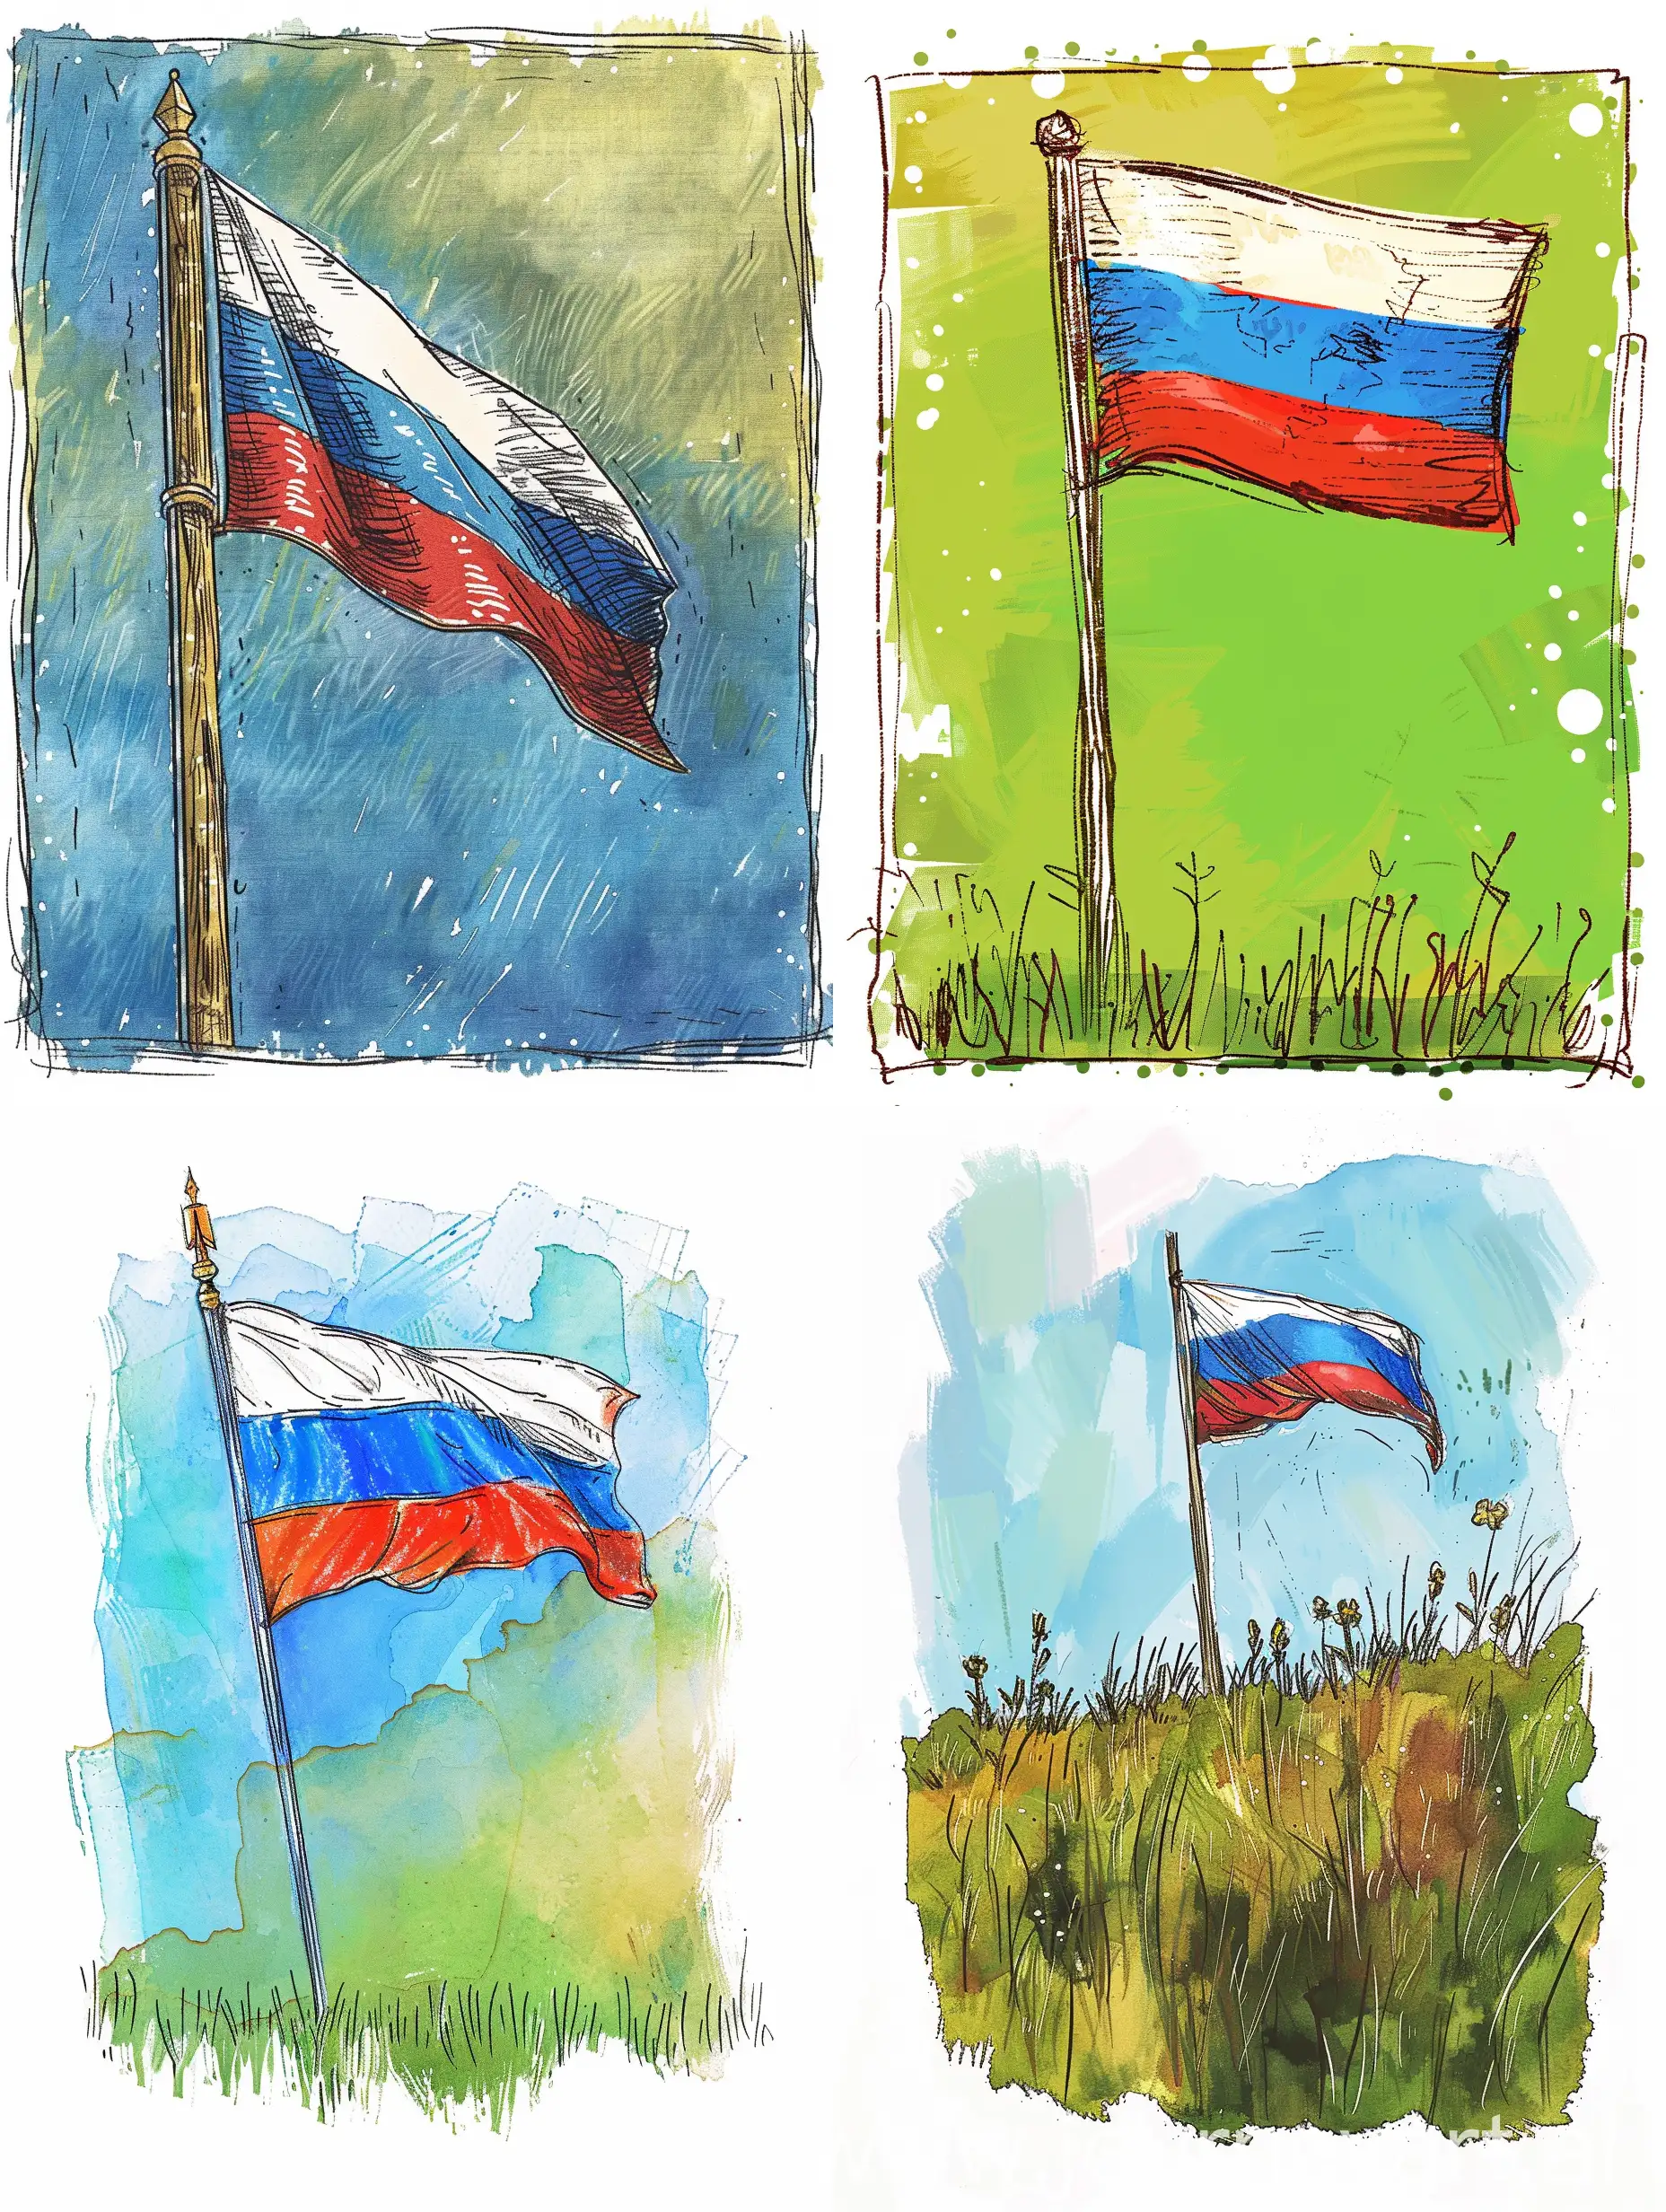 Russia-Unity-Day-Postcard-with-Flag-Celebration